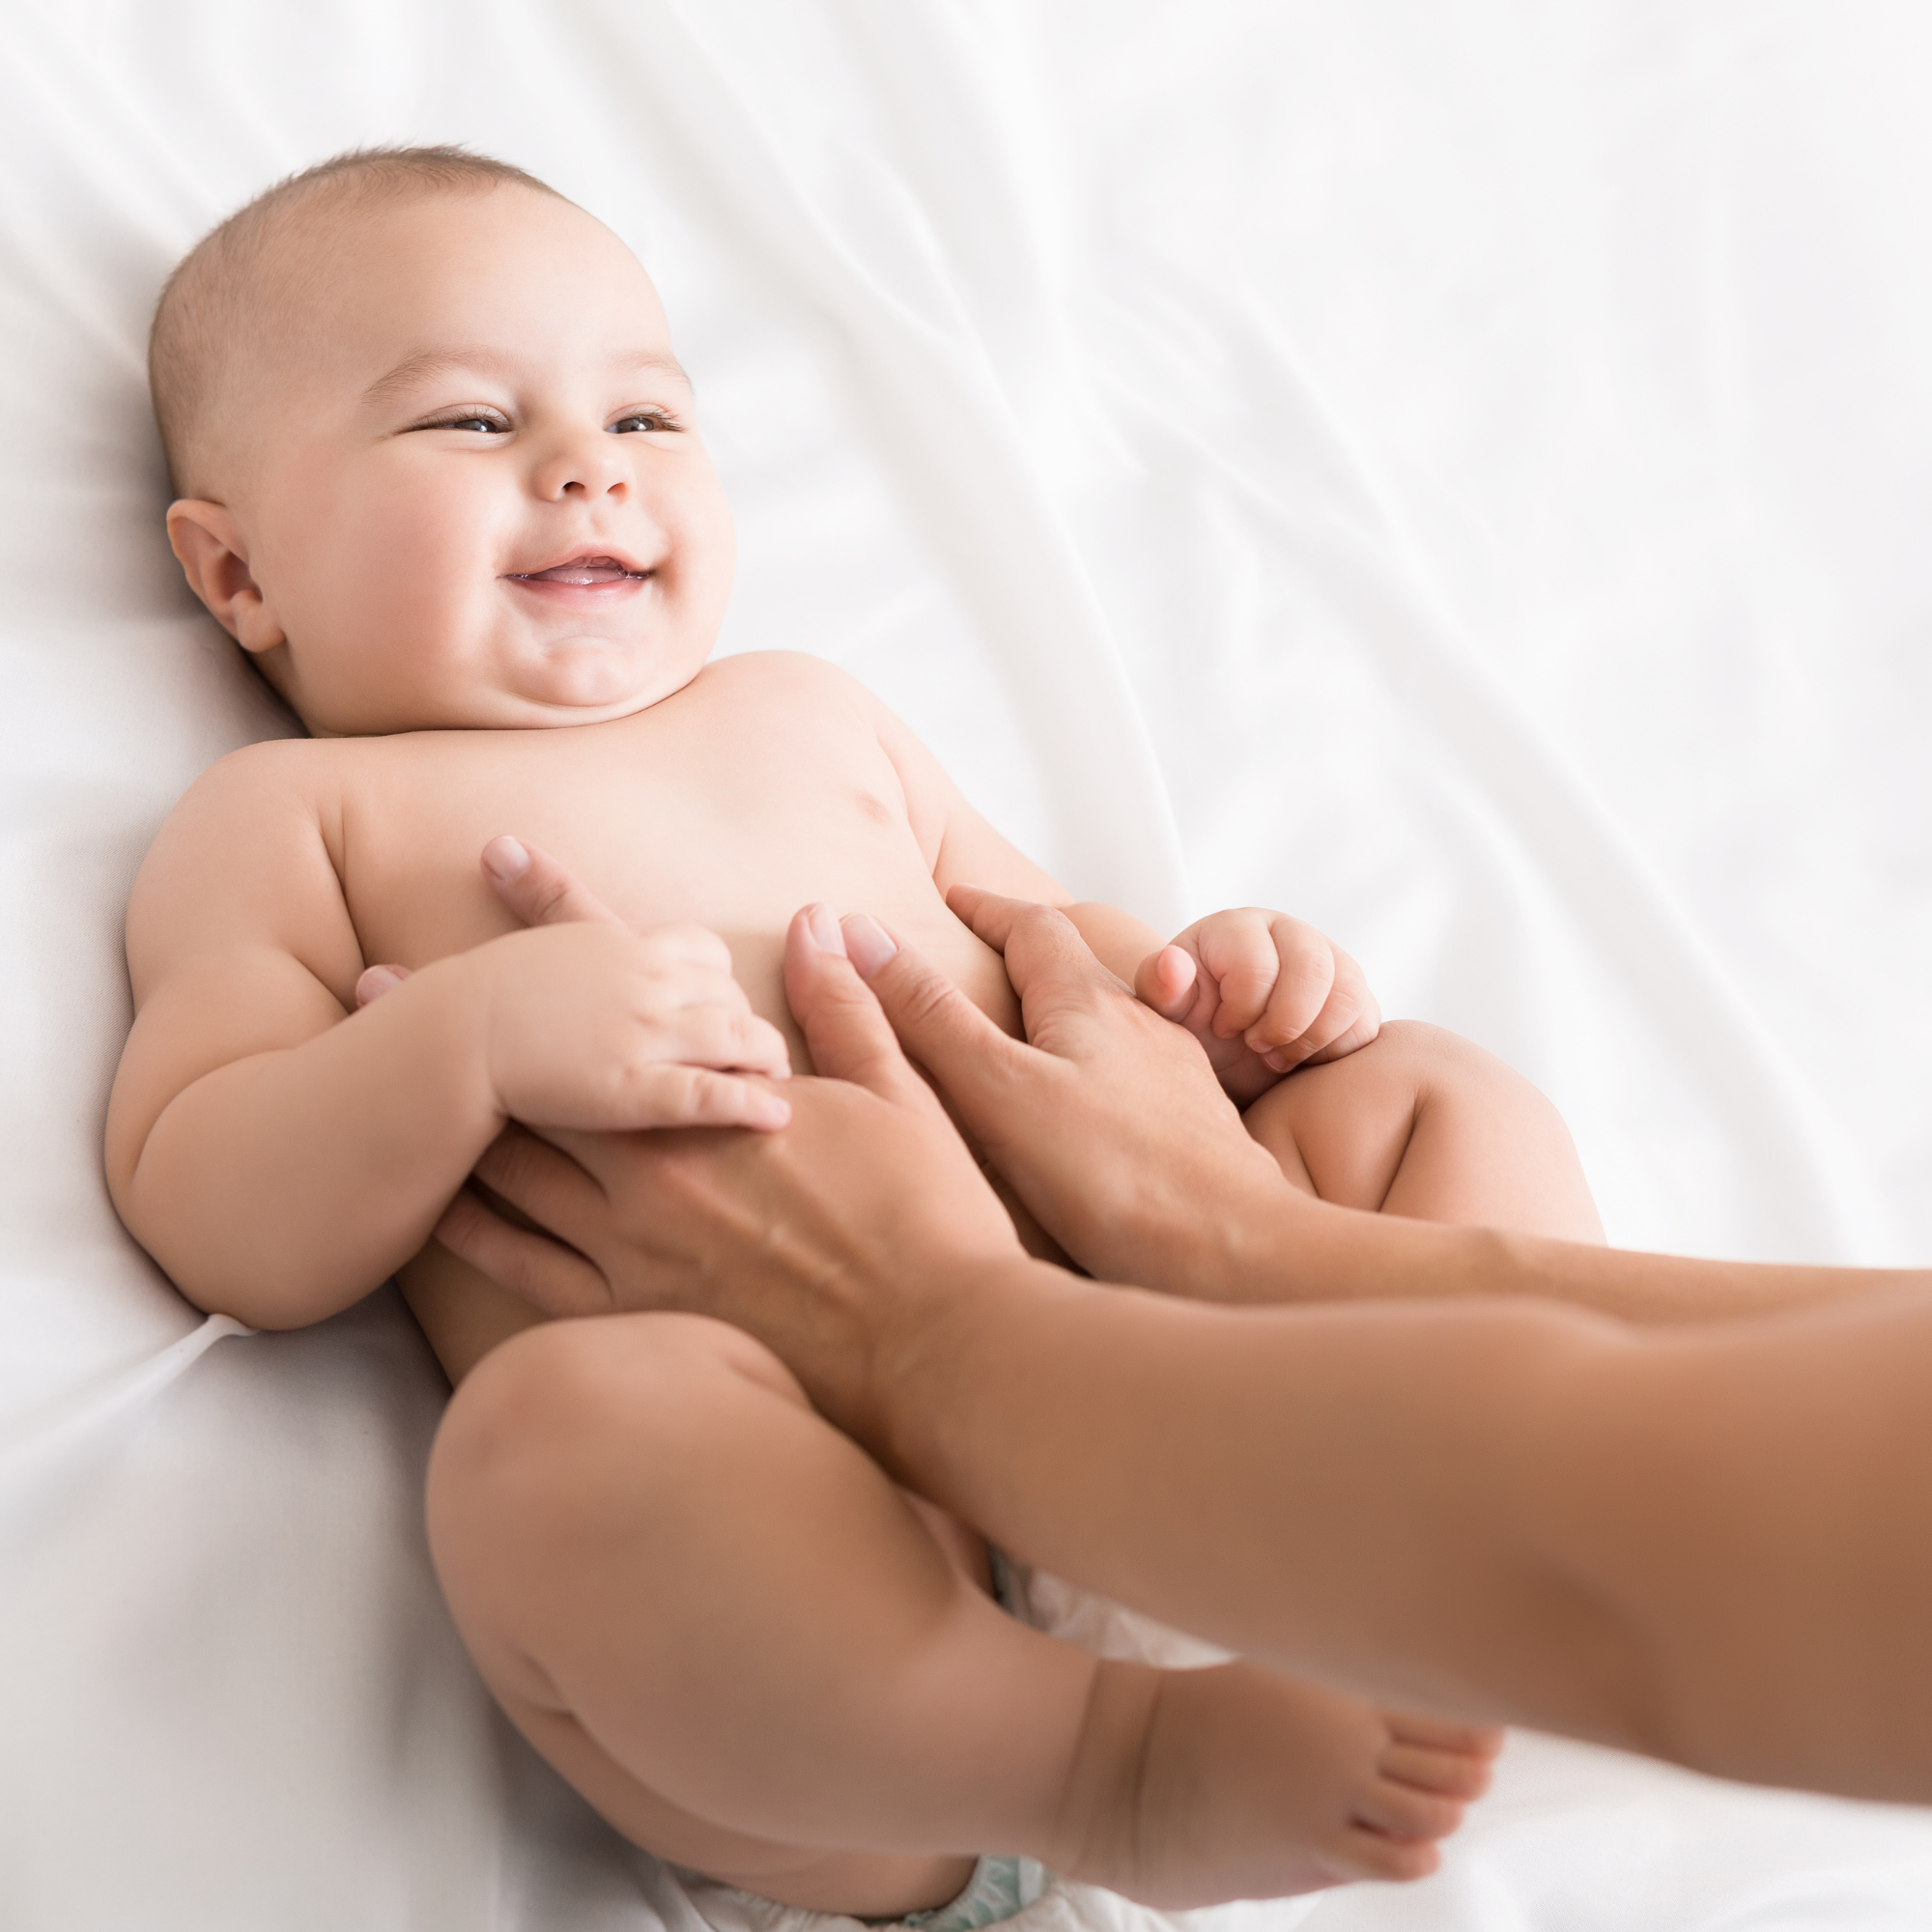 Baby lying on a white sheet with mums hands on their tummy | Parenting tips and advice | Colic Awareness - Clair de Lune UK